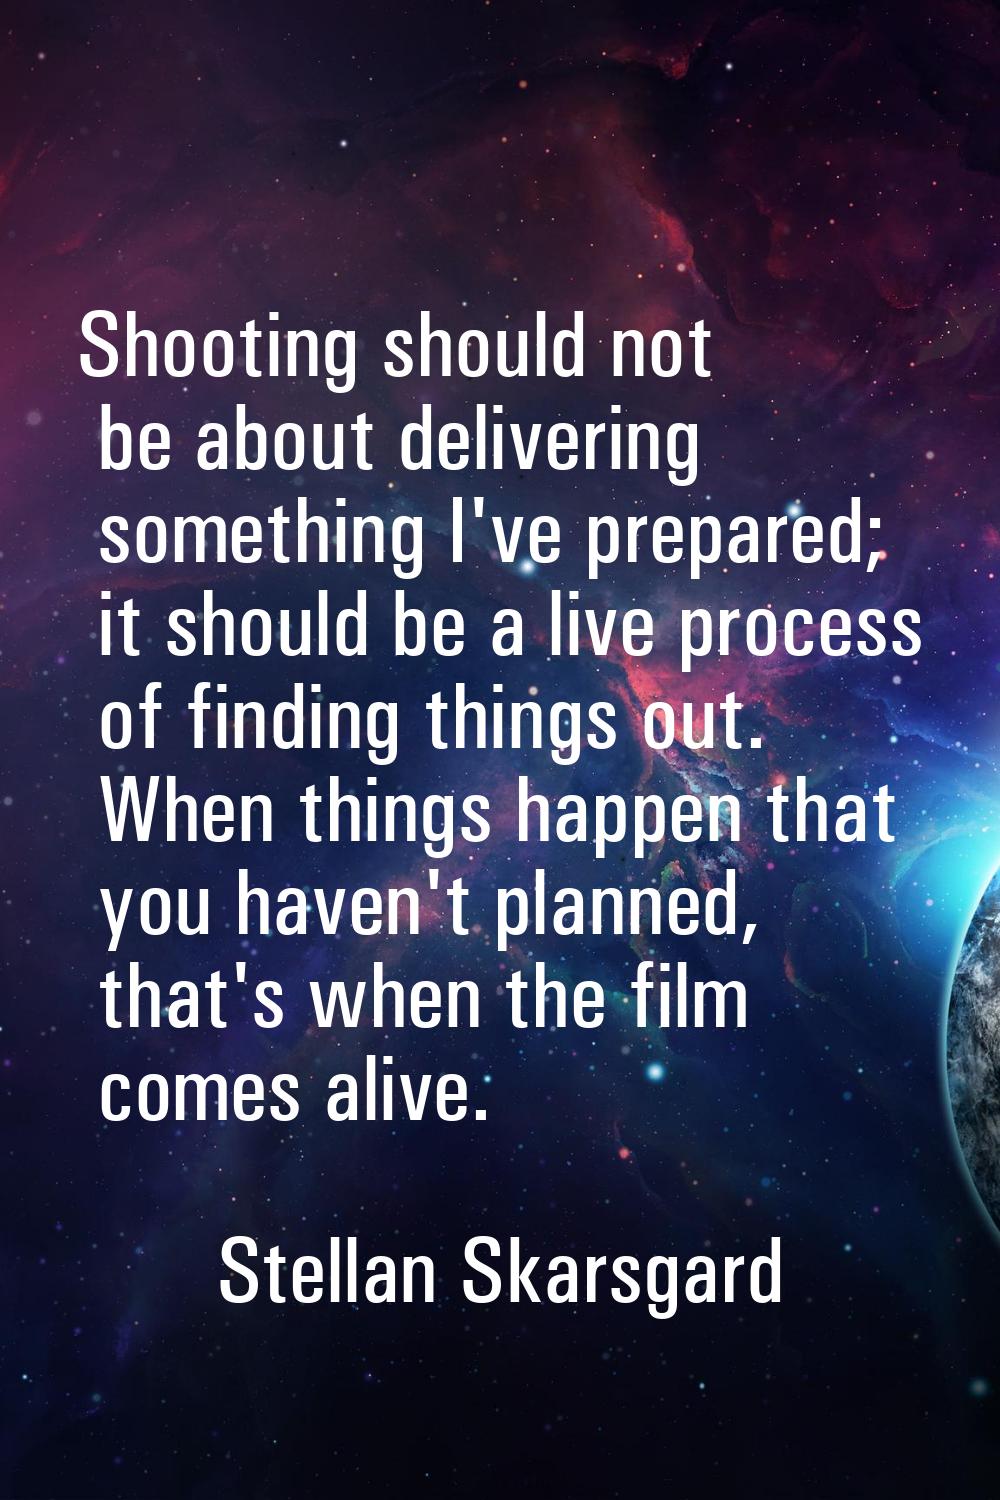 Shooting should not be about delivering something I've prepared; it should be a live process of fin